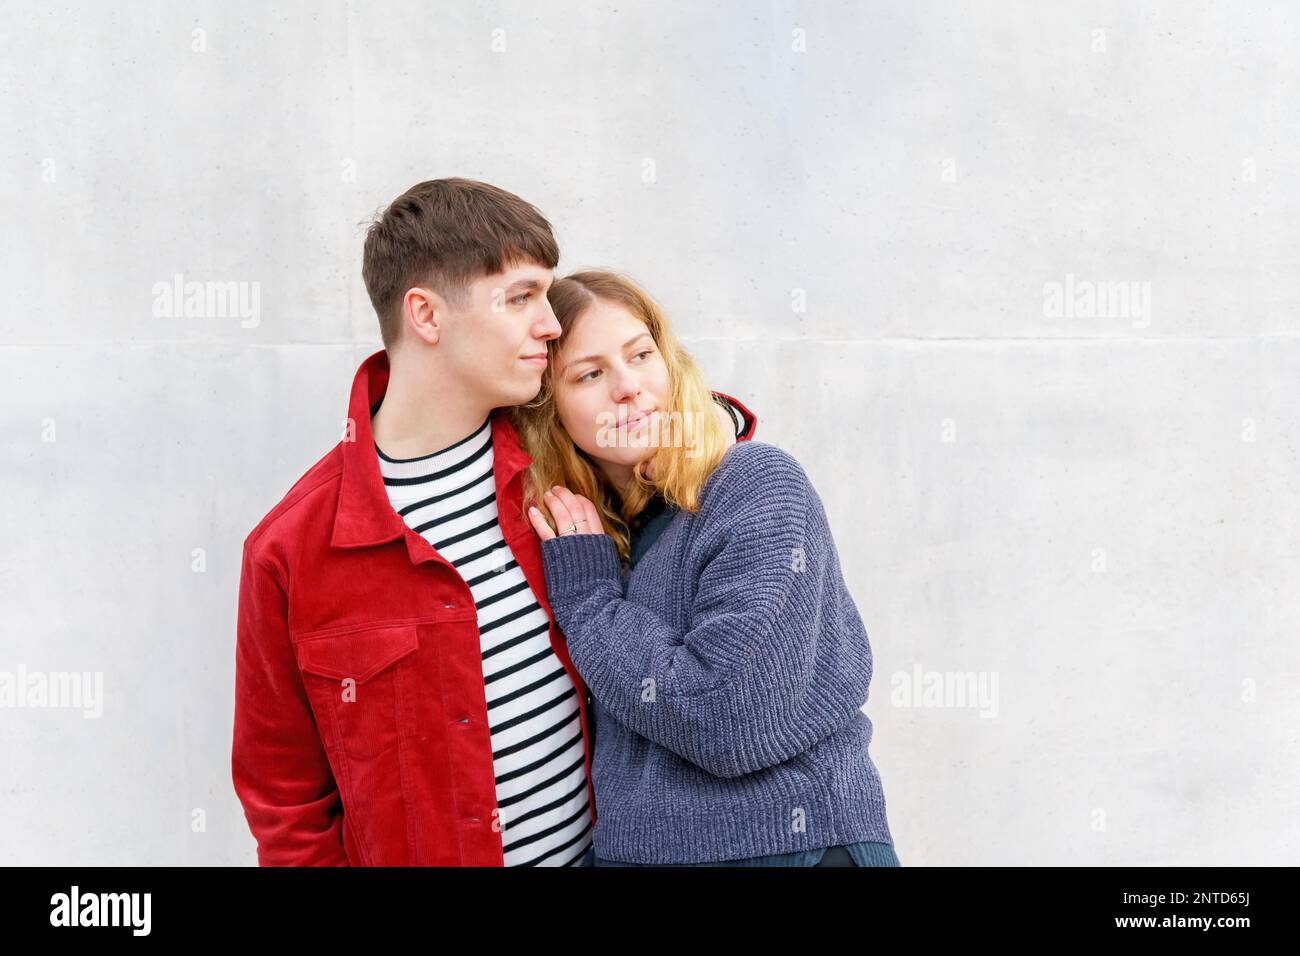 young affectionate couple standing in front of concrete cement wall loooking towards copy space Stock Photo